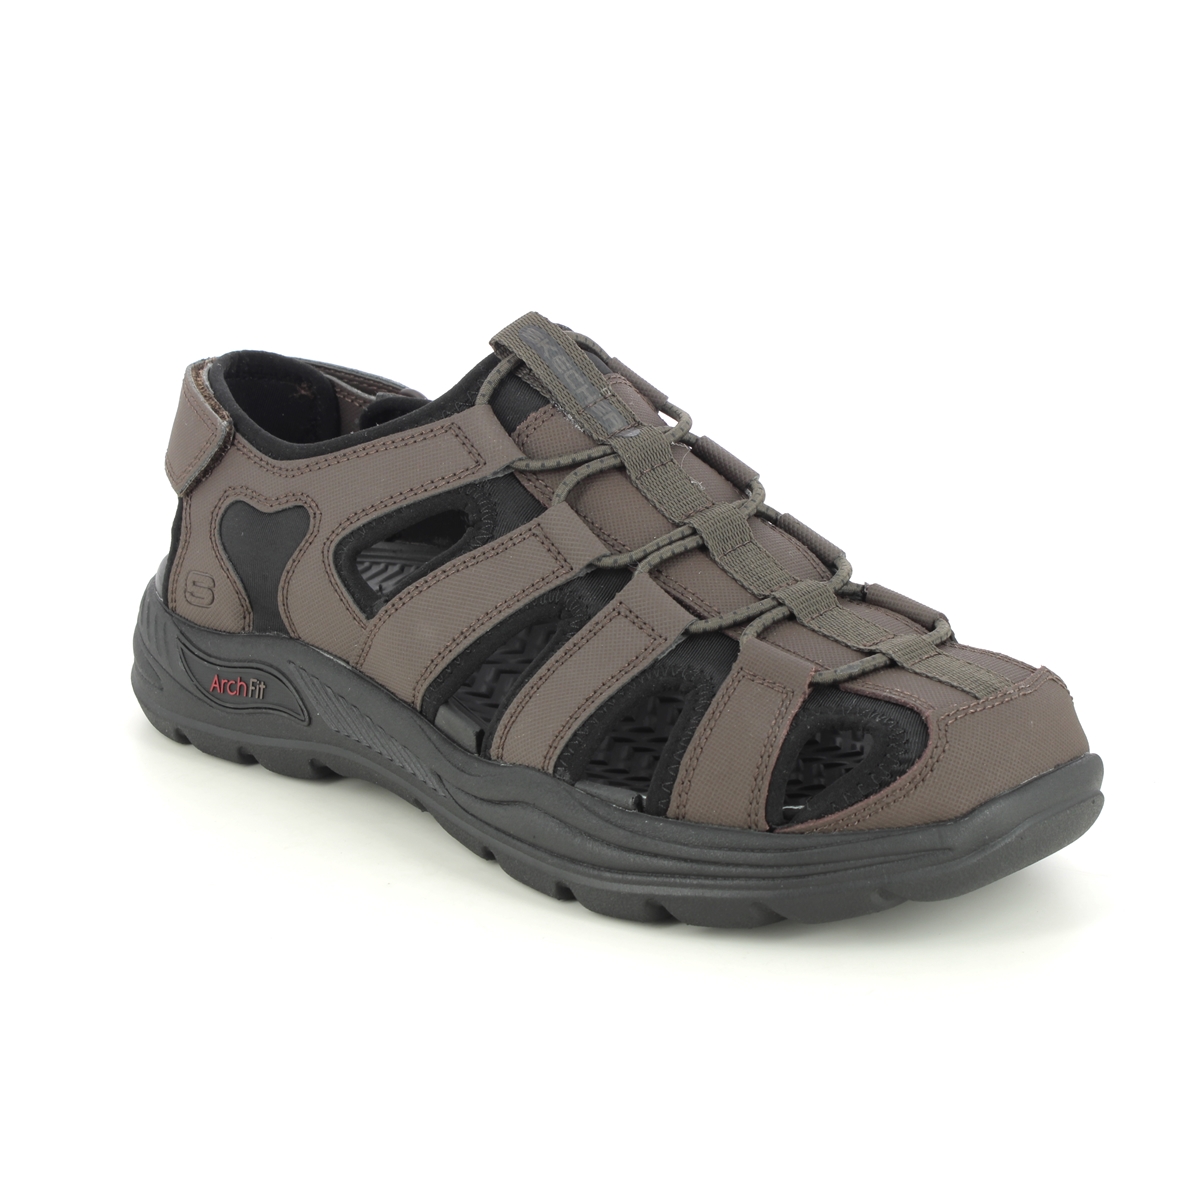 Skechers Arch Fit Motley Verlander CHOC Chocolate brown Mens Closed Toe Sandals 204348 in a Plain Man-made in Size 10